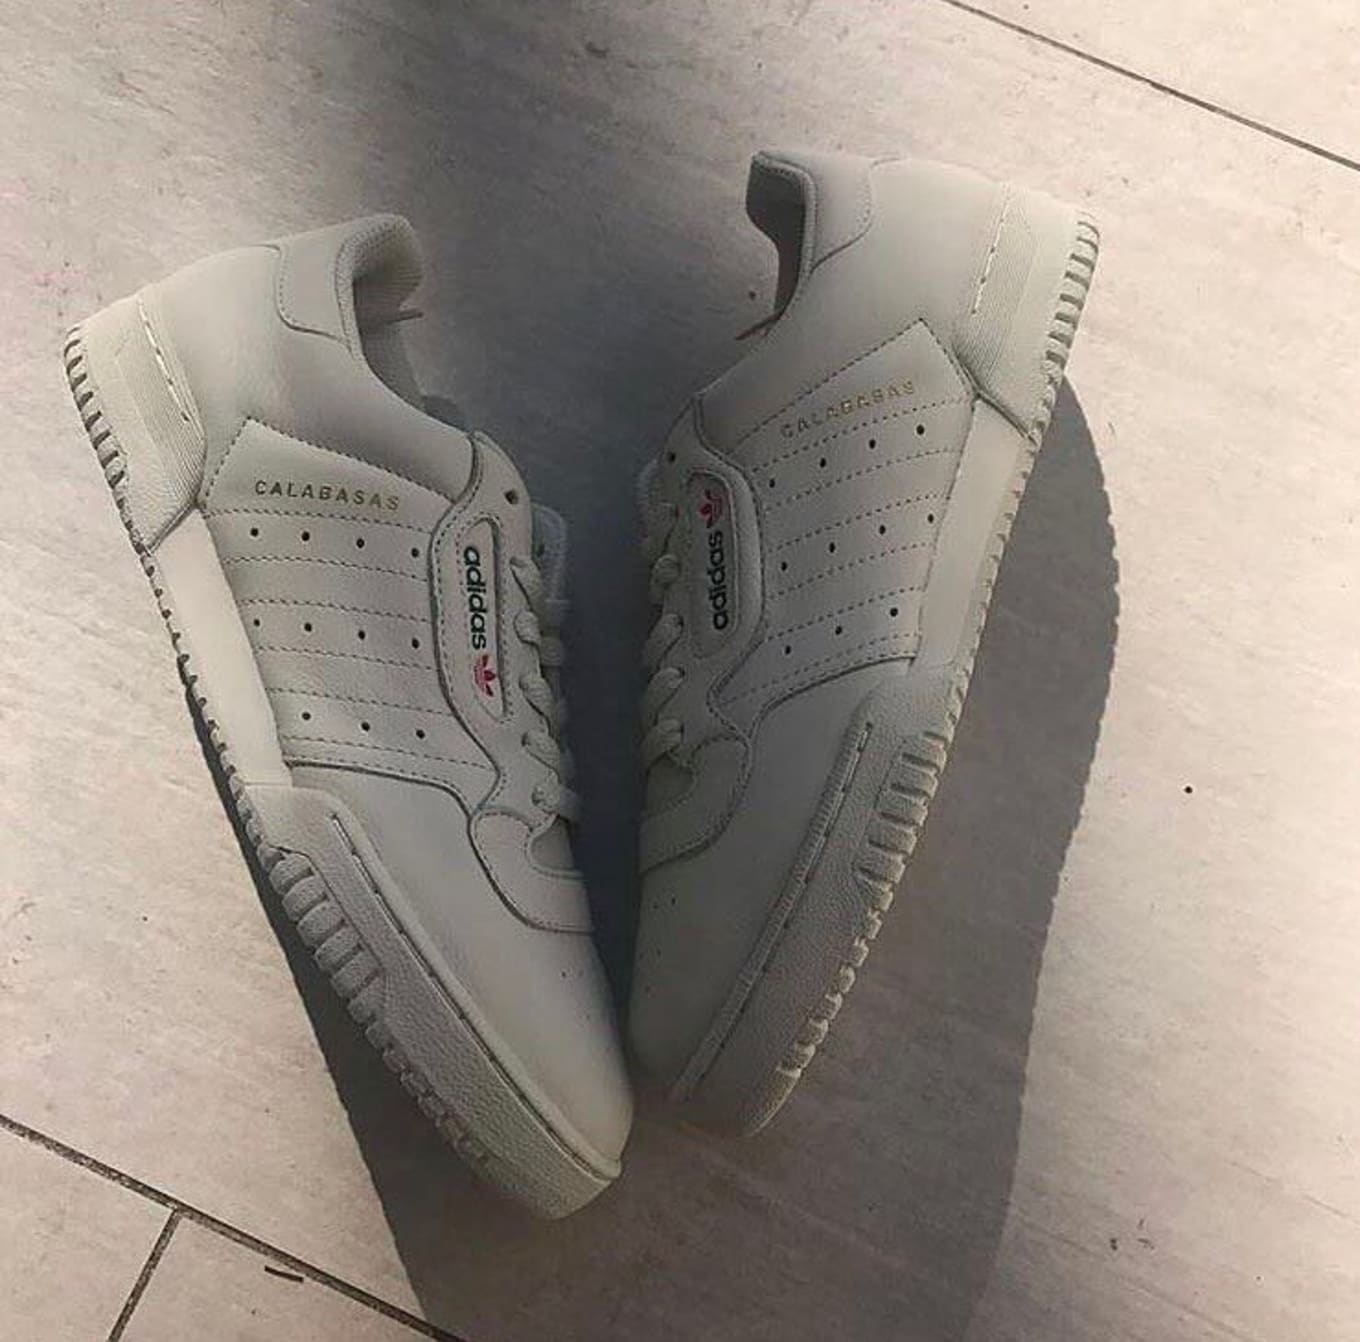 Kanye West Adidas Calabasas Powerphase Sneaker 2017 Release Date | Sole  Collector